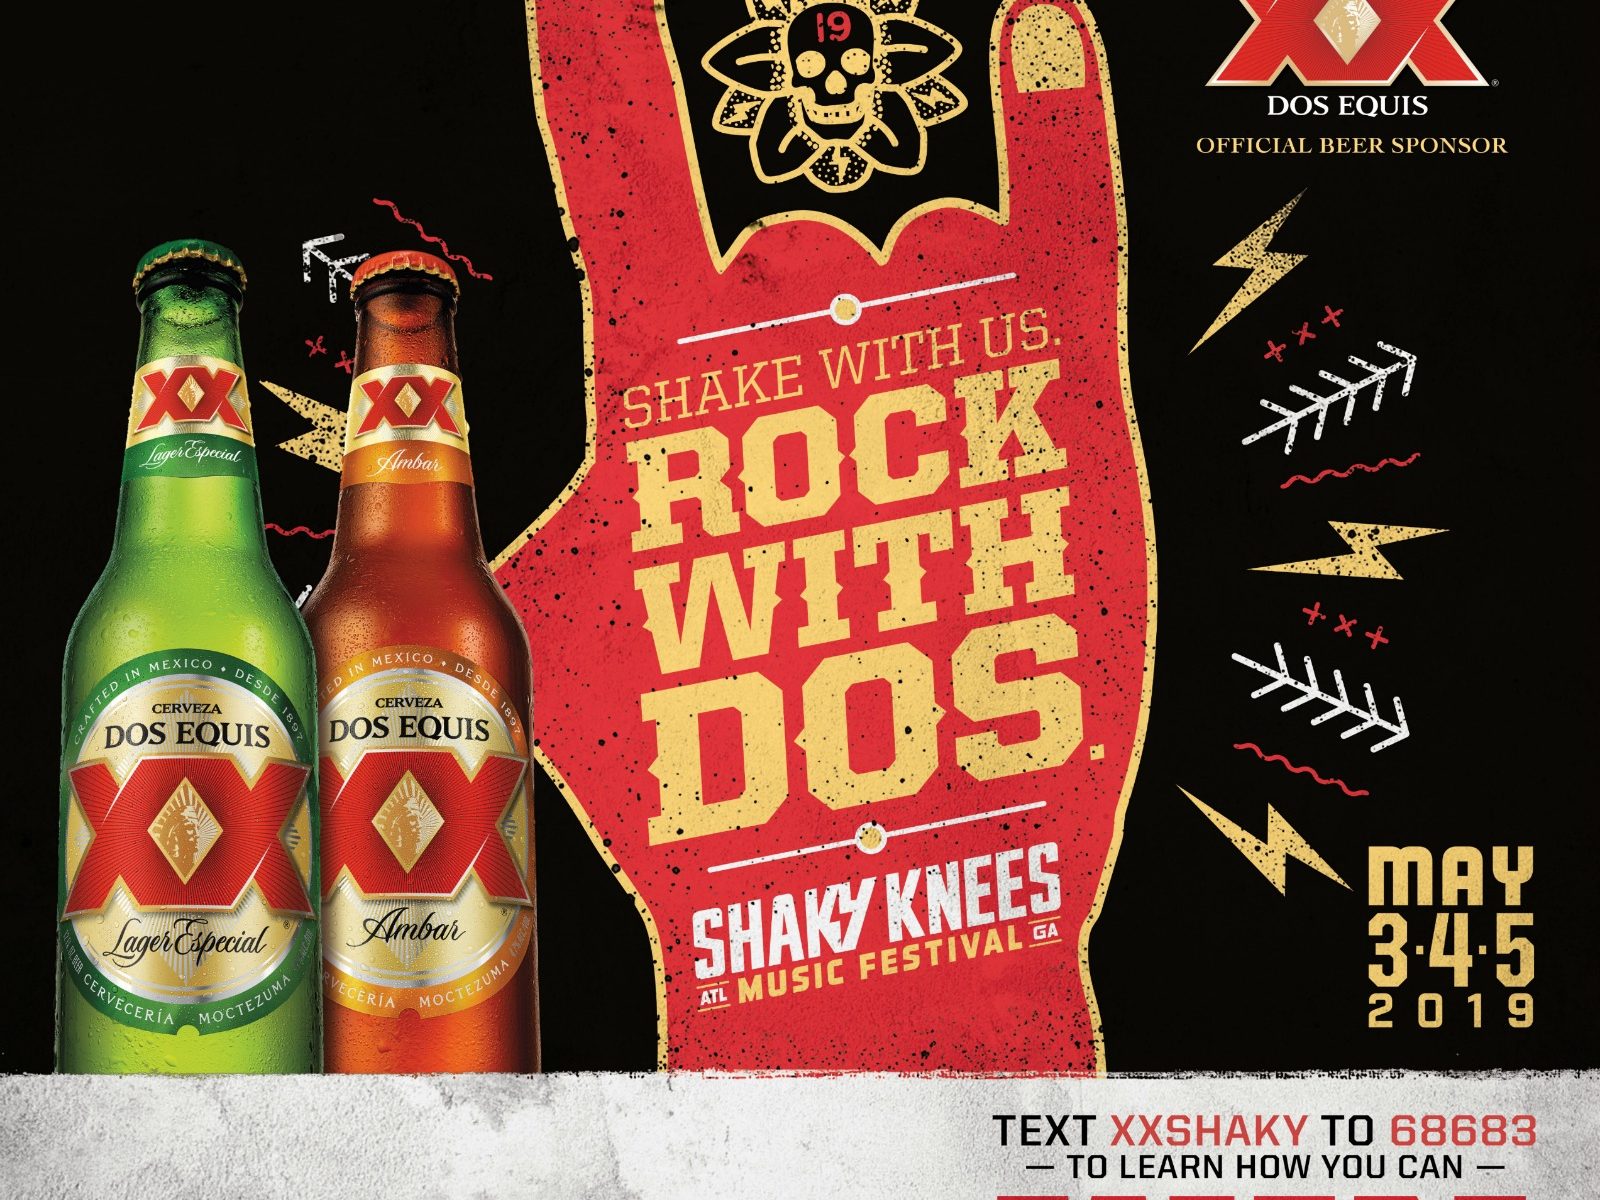 Heads Up Georgia Folks – Enter To Win Tickets To The Shaky Knees Music Festival & Rock With Dos Equis!